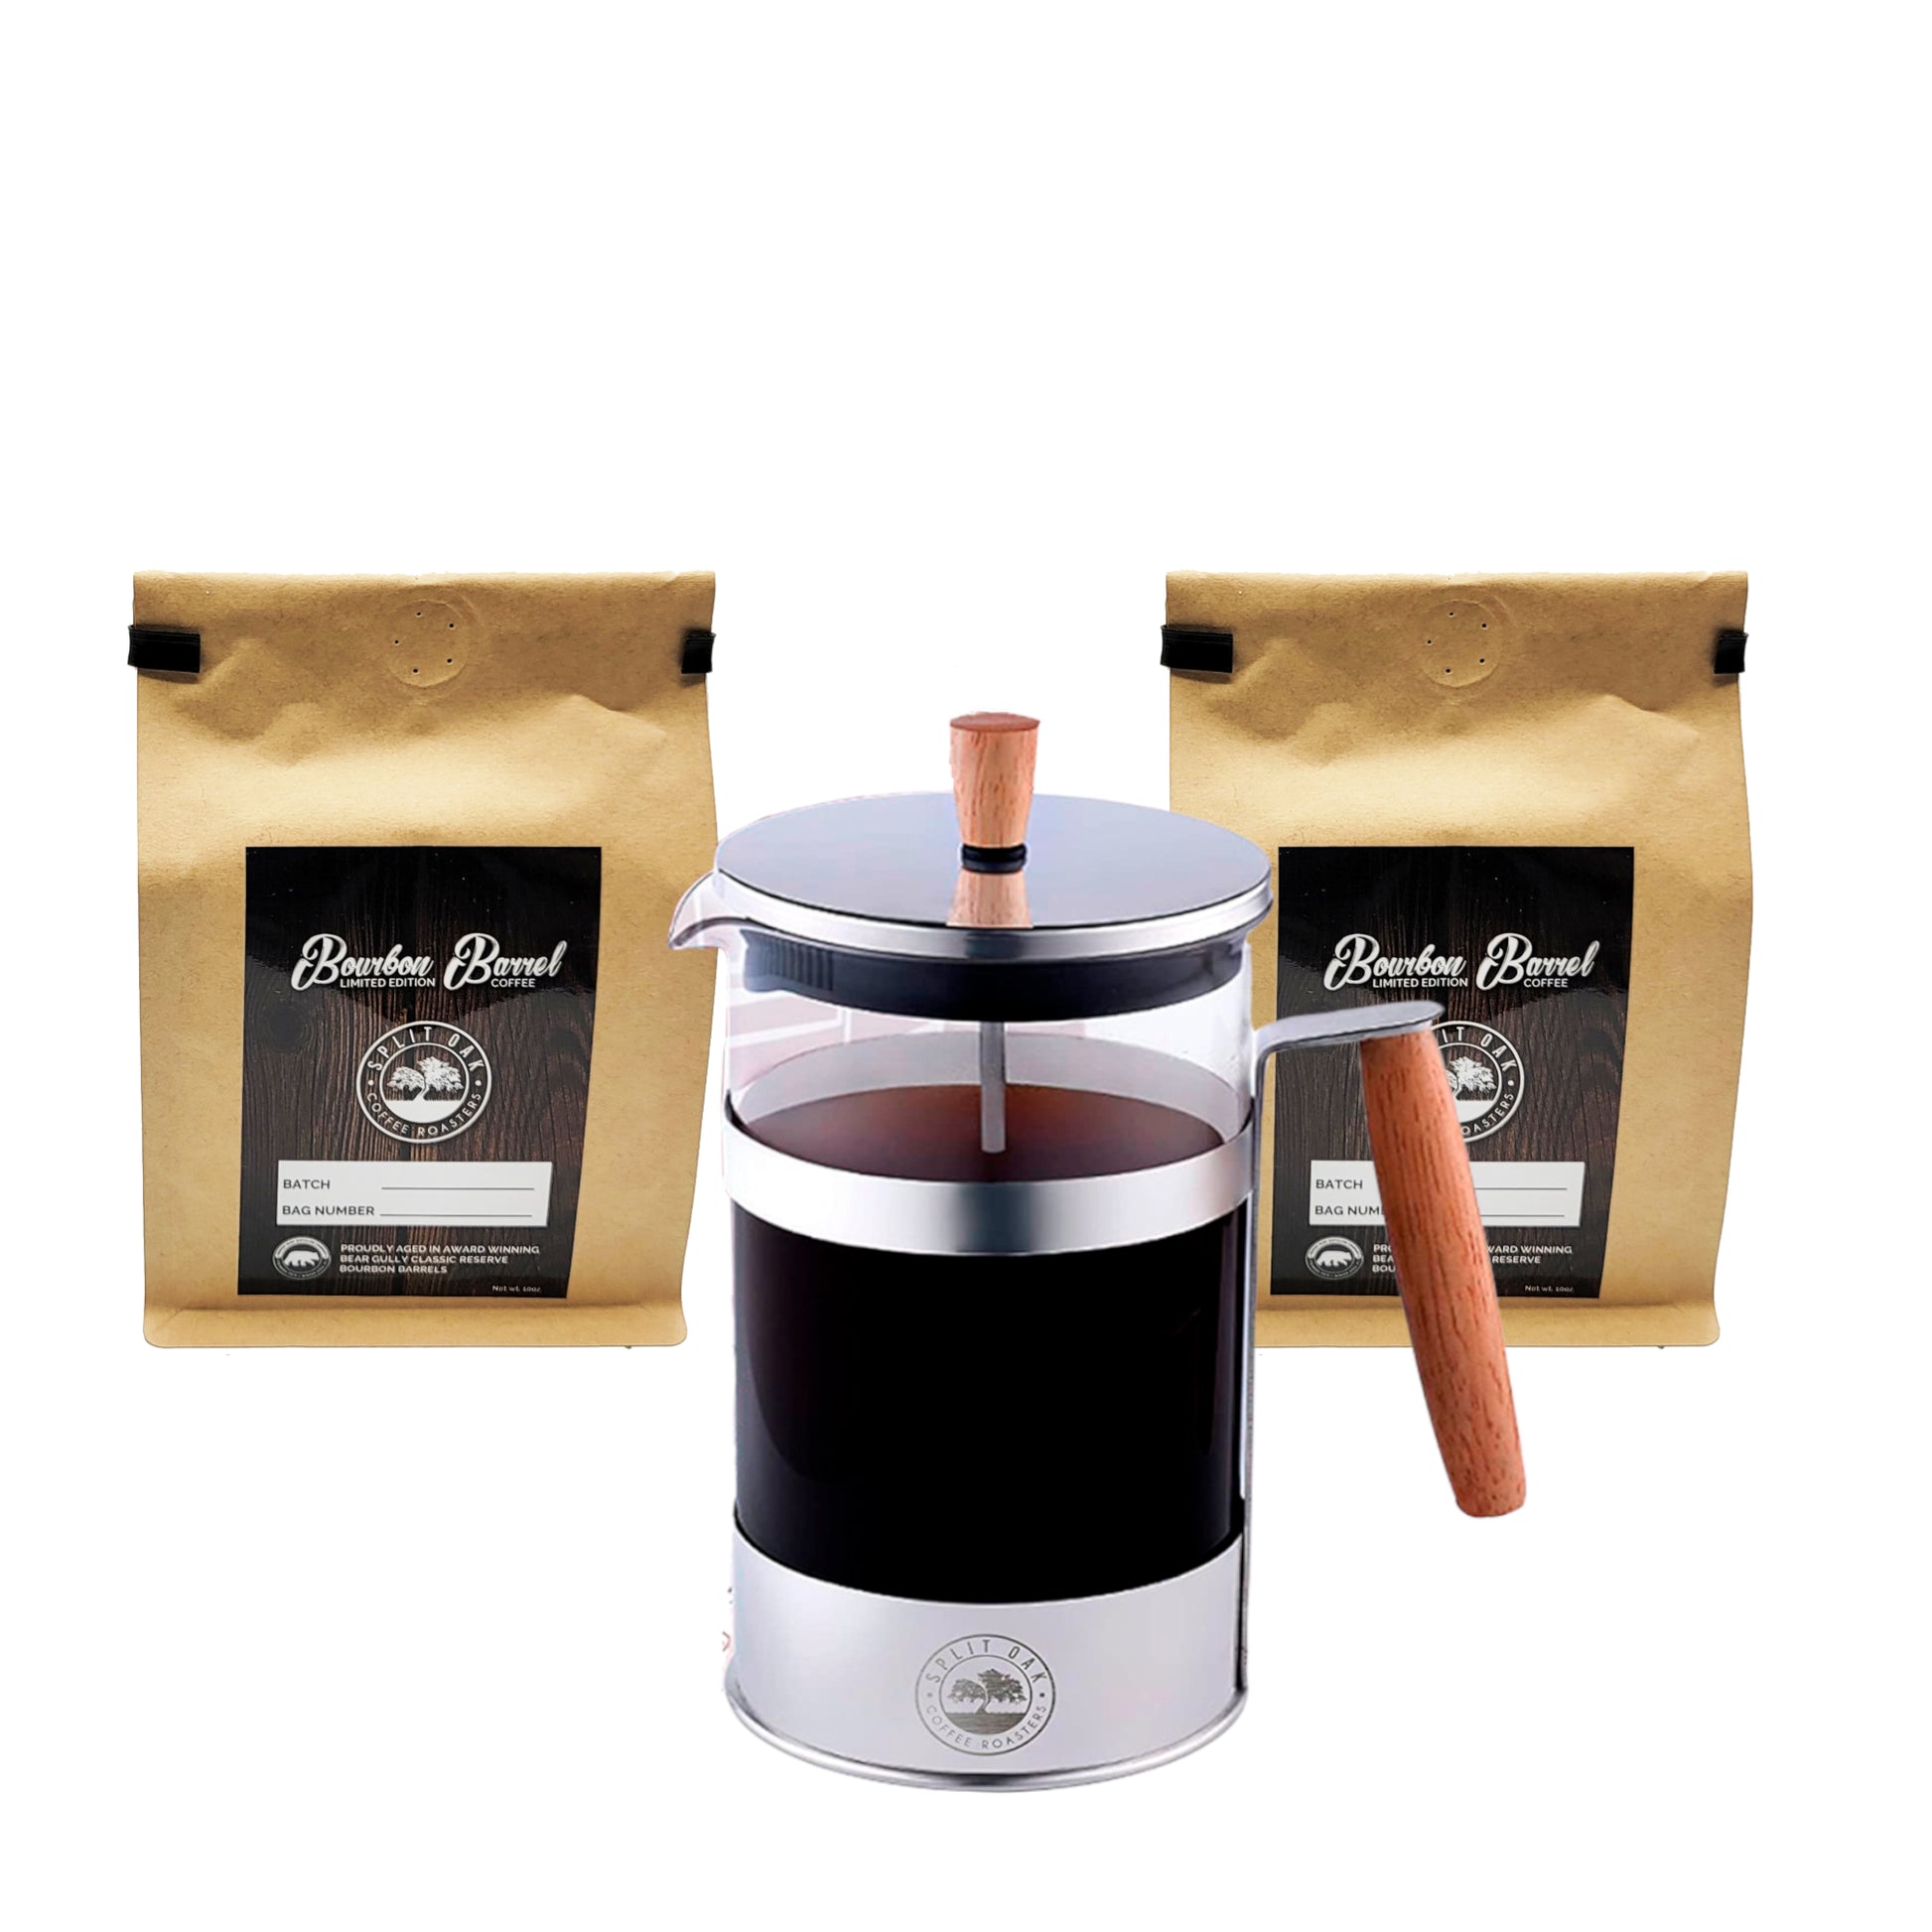 Coffee Gift Box Set 2 assorted coffees +1 French Press Coffee an